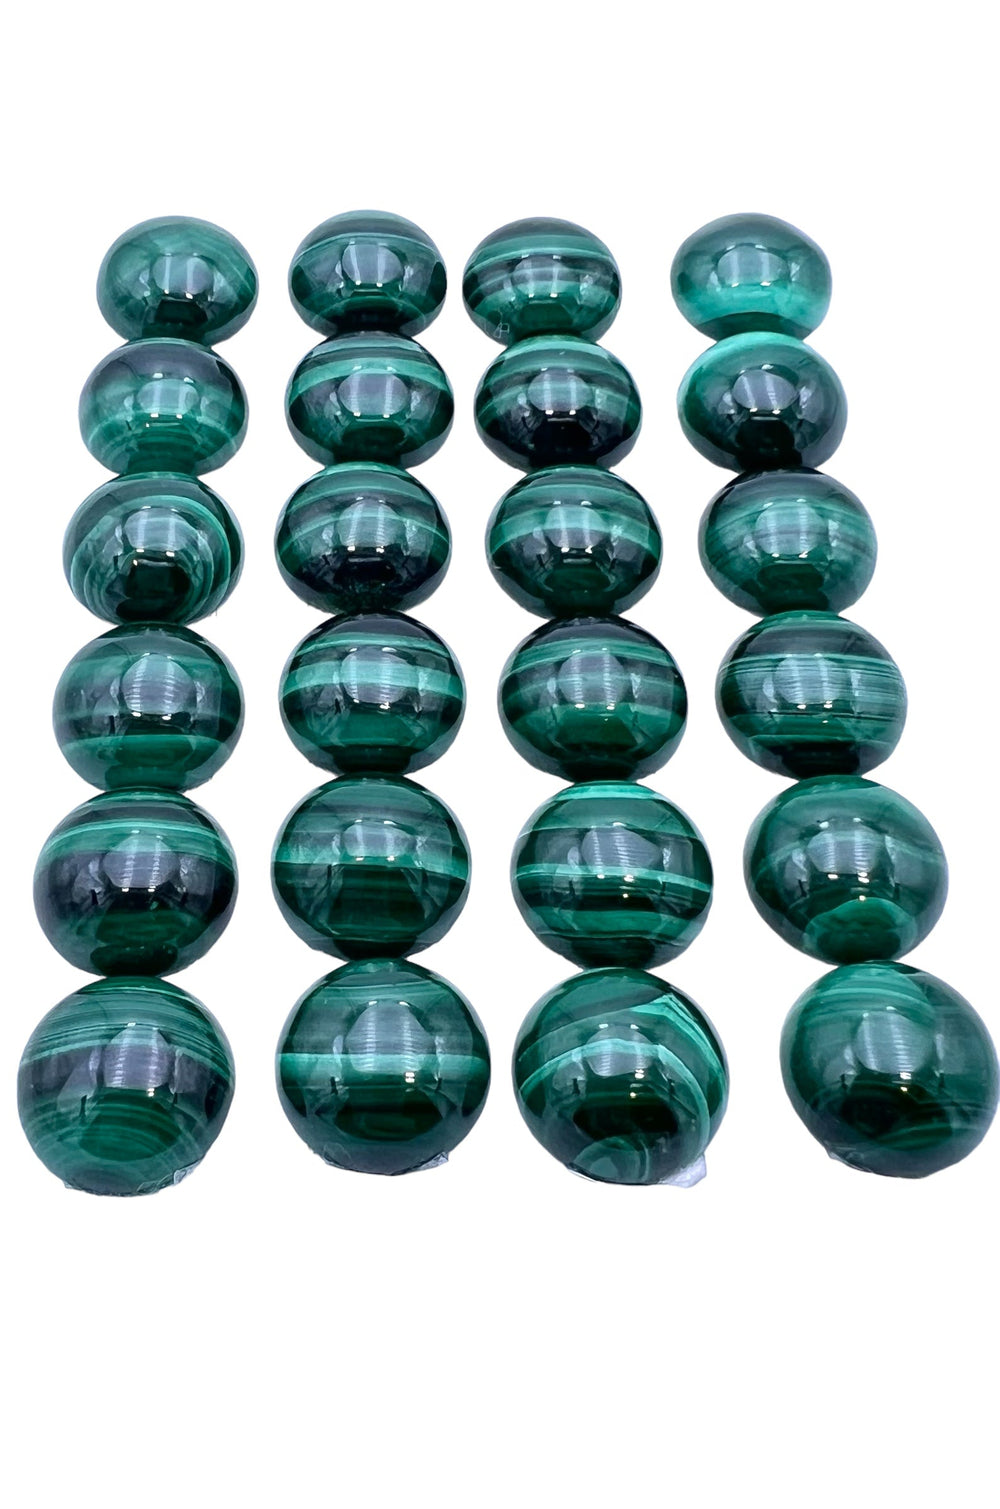 High Pattern Malachite 14mm Round Cabochons (pkg of 2 Cabs)